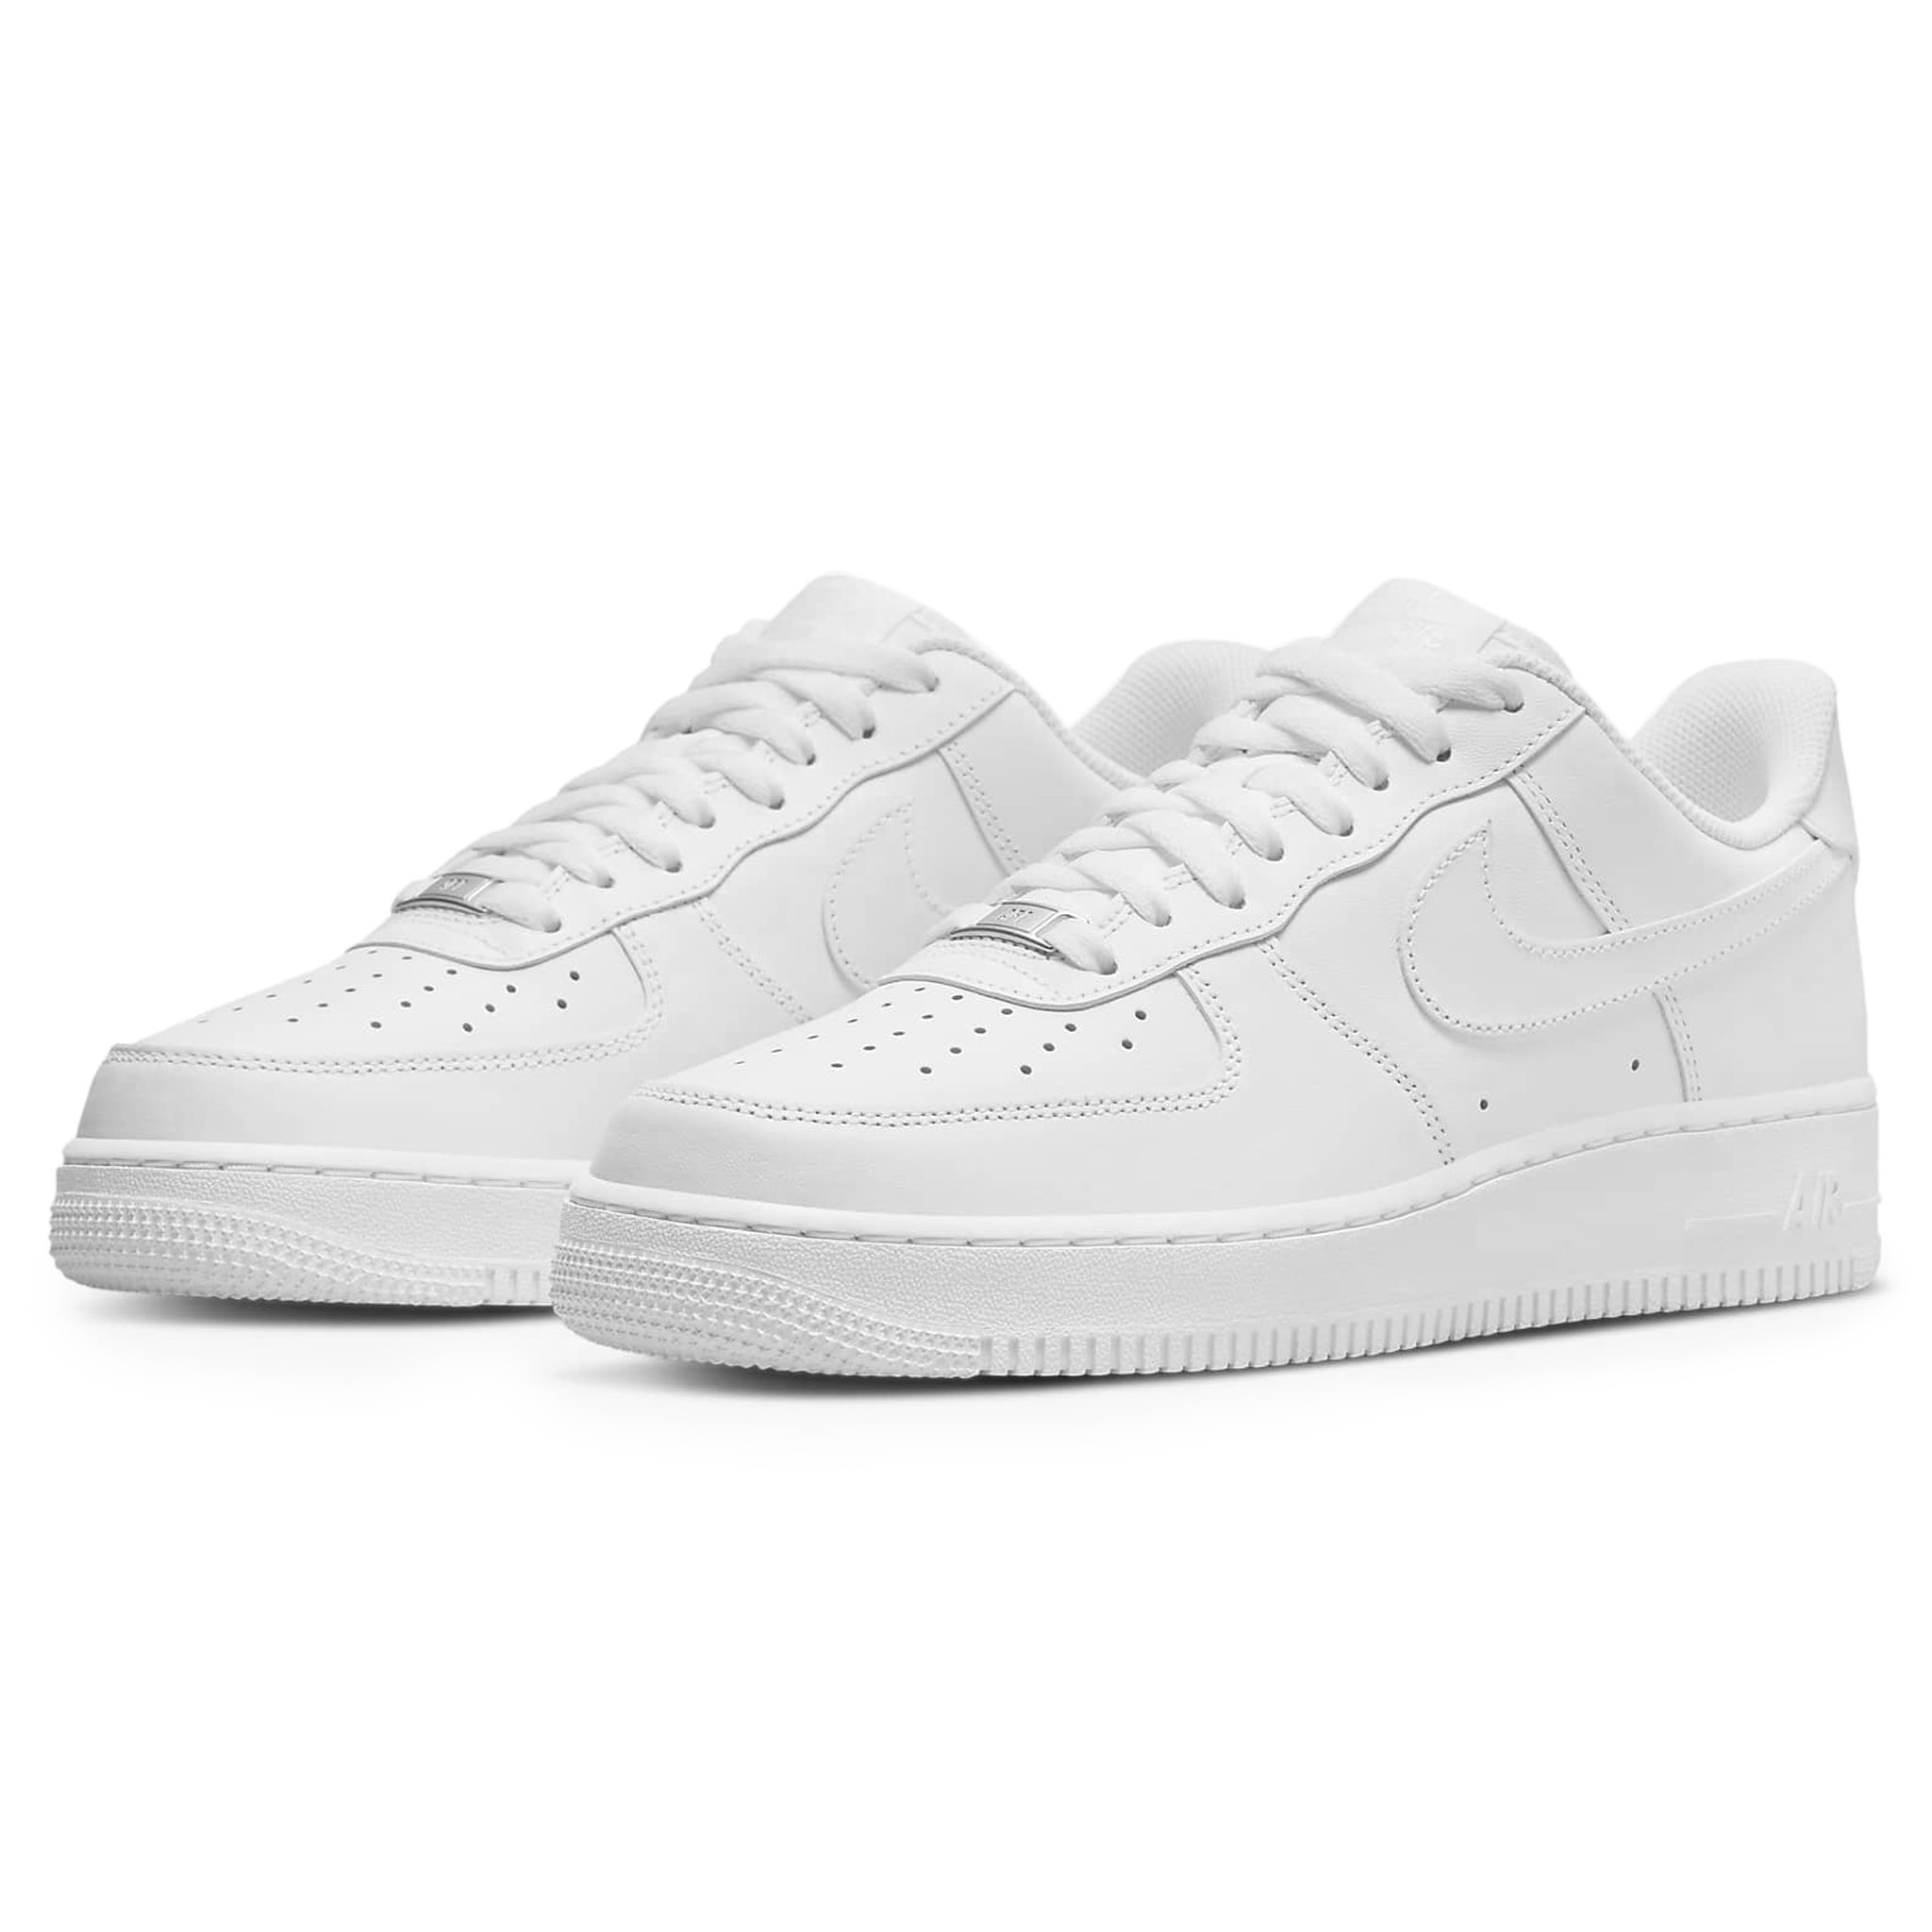 Front side view of Nike Air Force 1 Low '07 White